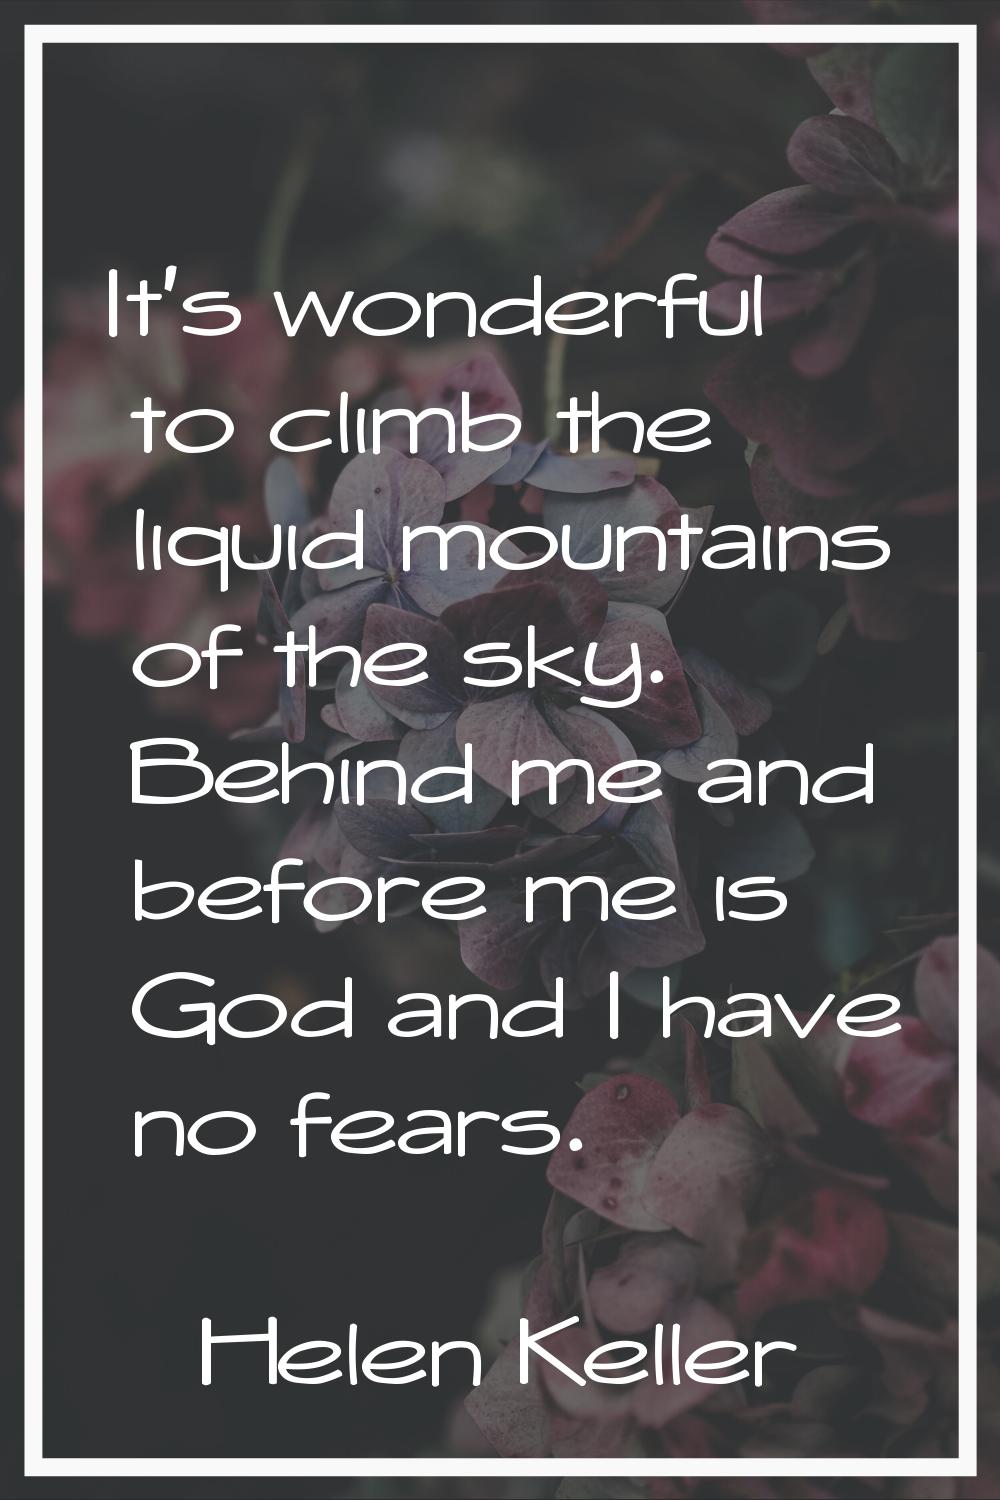 It's wonderful to climb the liquid mountains of the sky. Behind me and before me is God and I have 